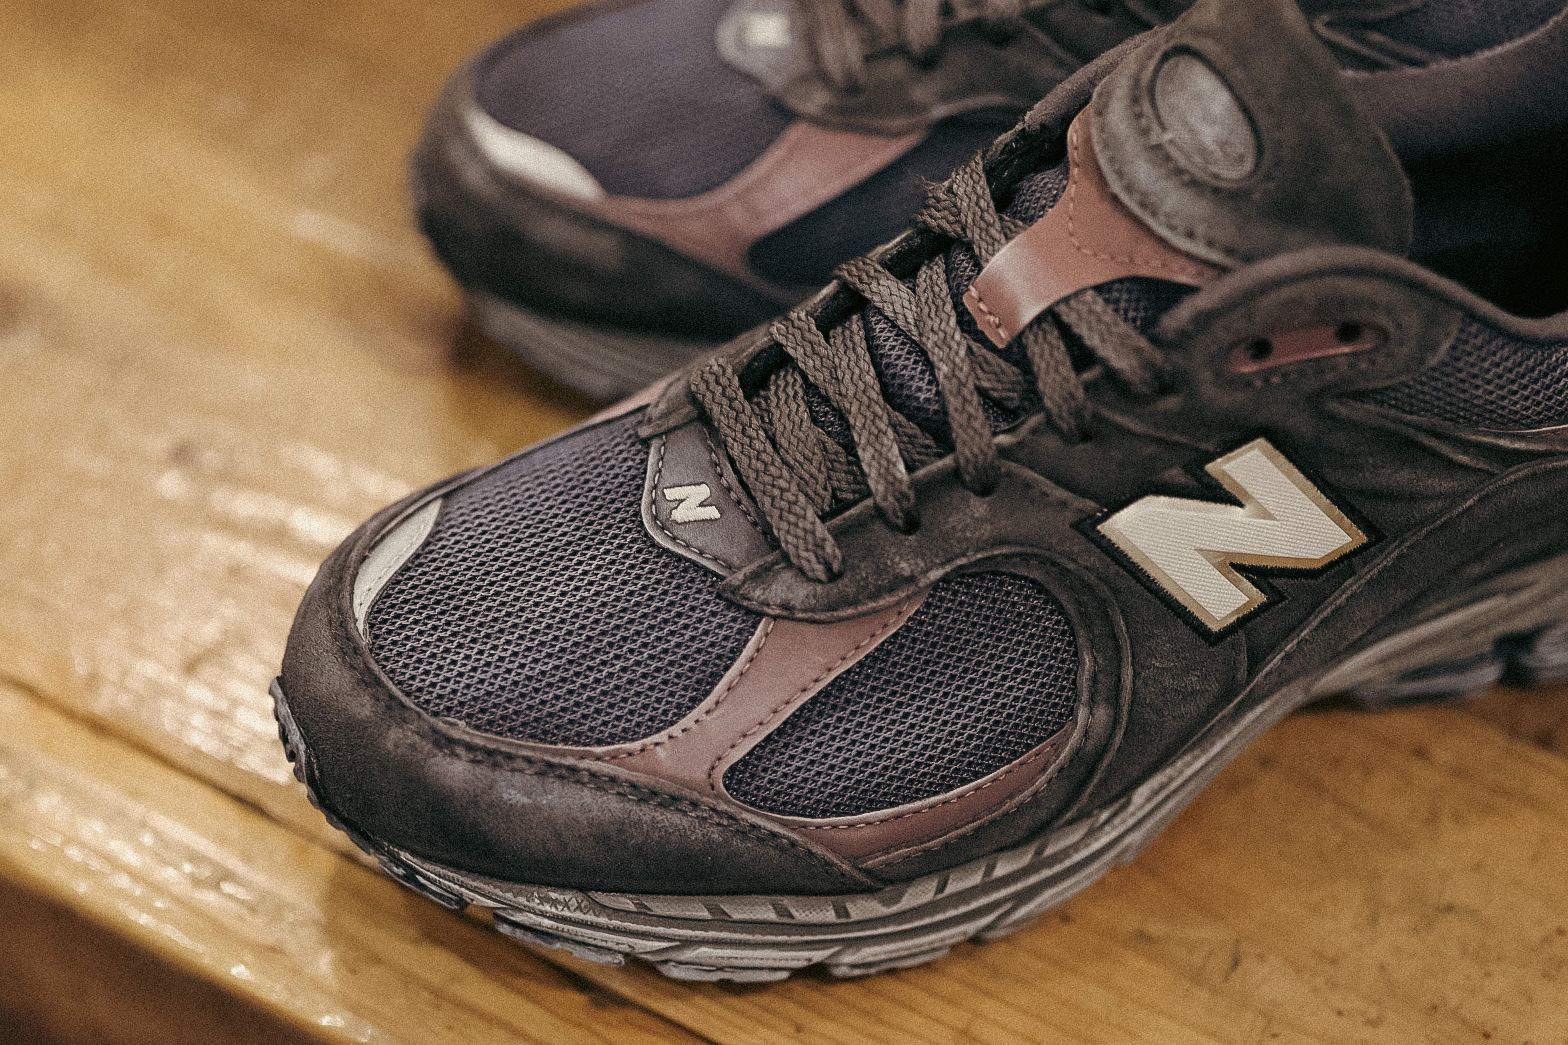 New Balance Upgrade the 2002R with GORE-TEX - Sneaker Freaker